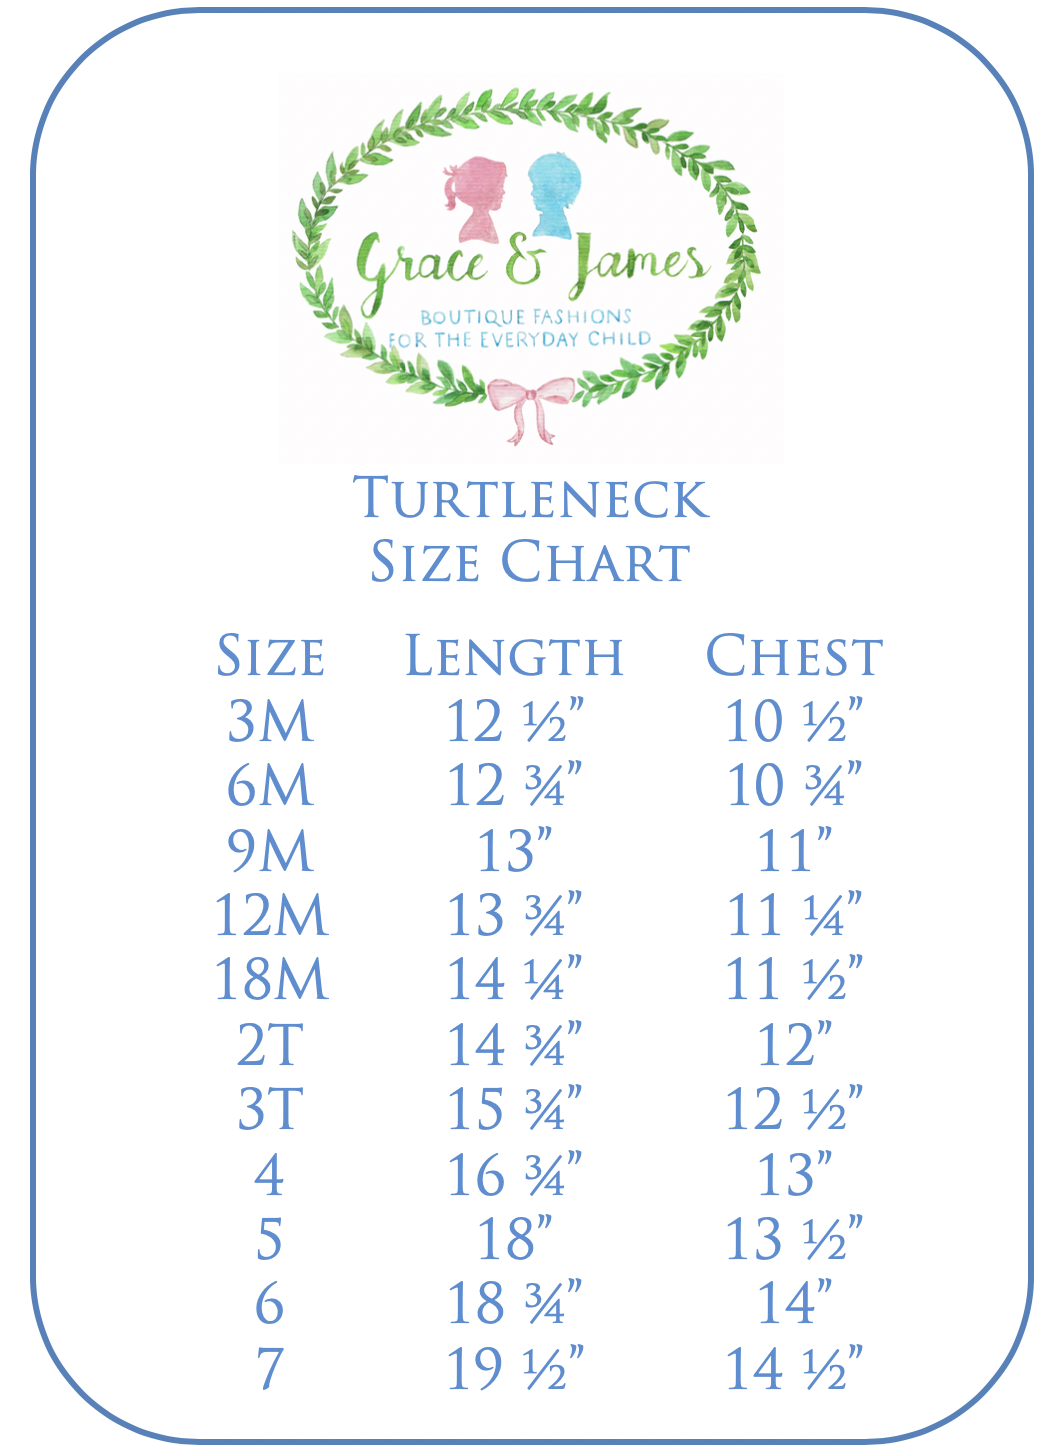 Grace and James Boutique Fashion for every child turtleneck size chart